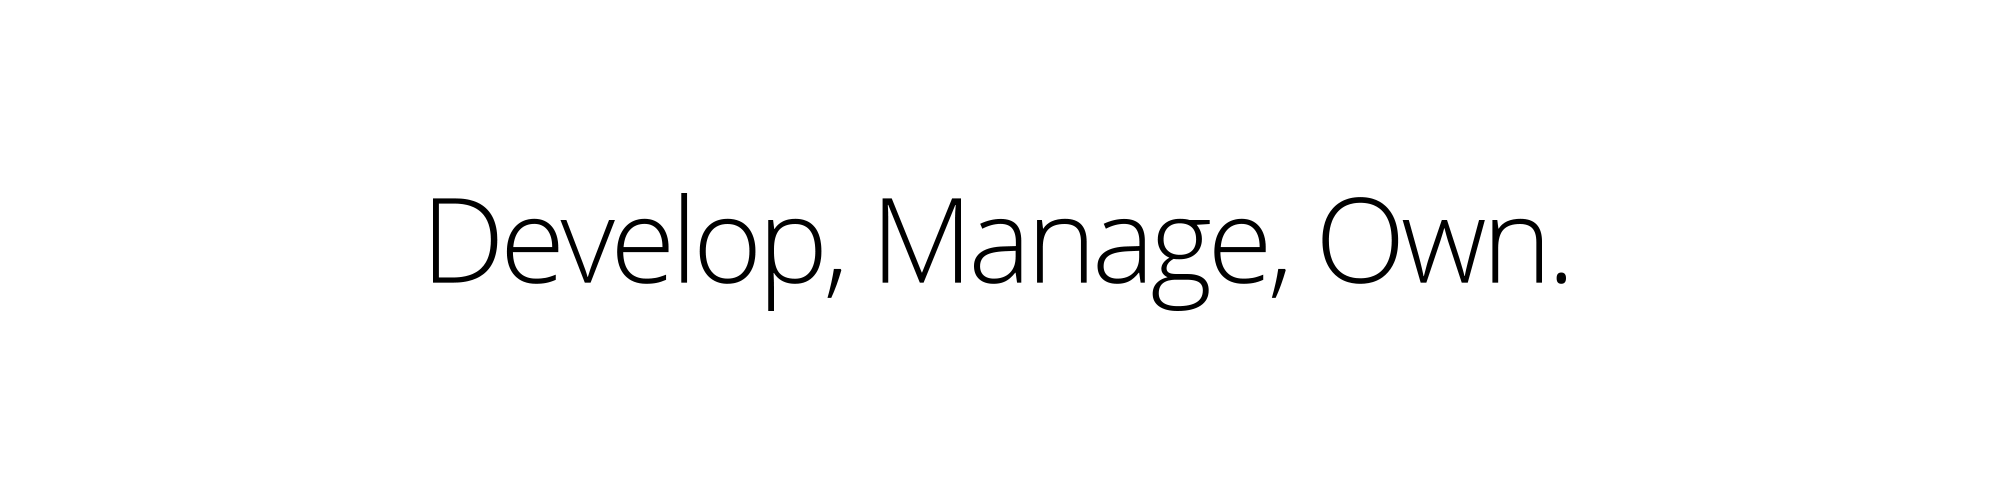 Develop, Manage, Own tagline large type